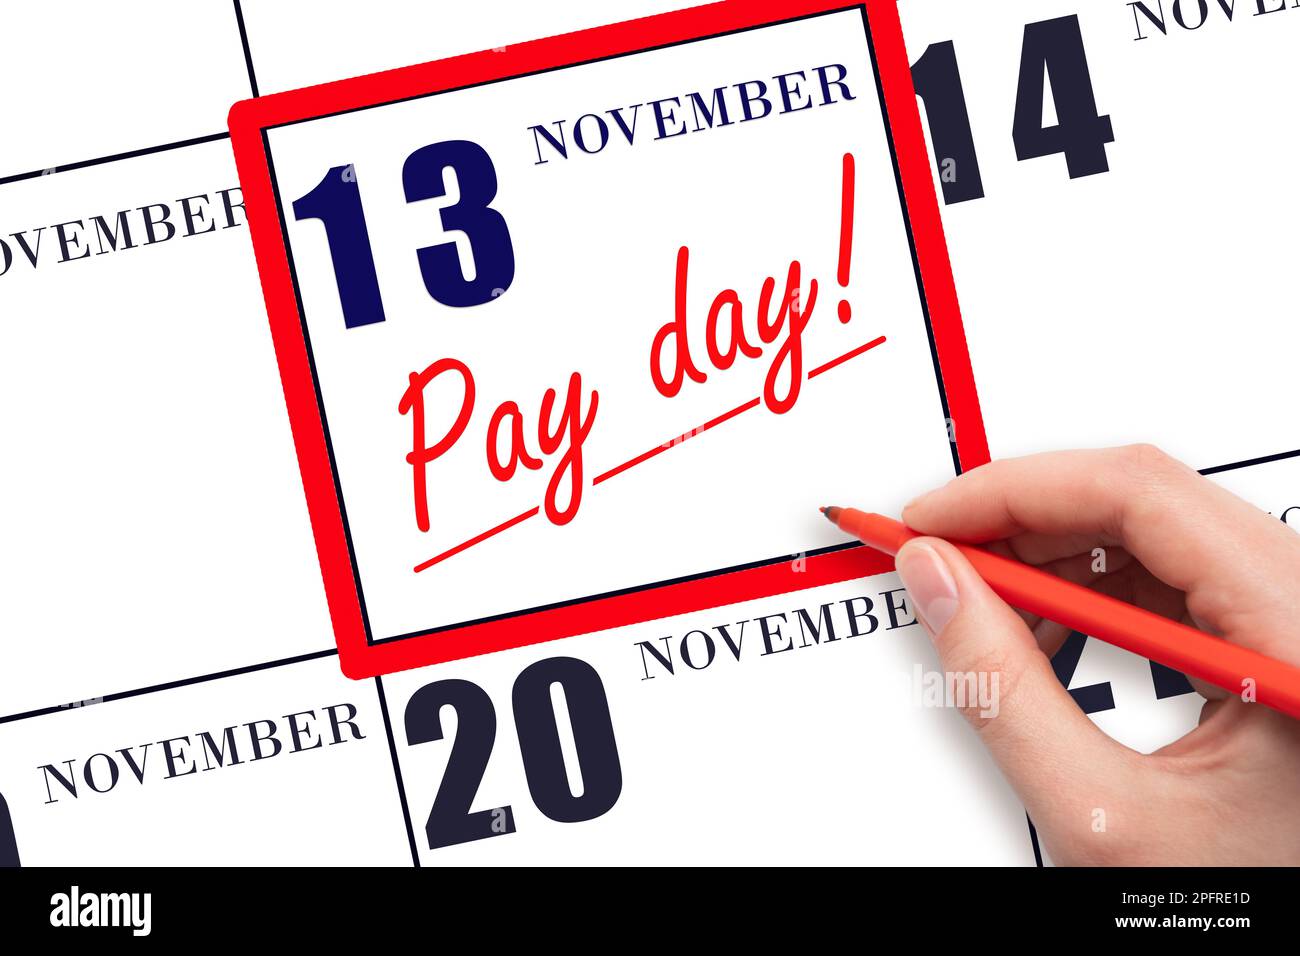 13th day of November. Hand writing text PAY DATE on calendar date November 13 and underline it. Payment due date.  Reminder concept of payment. Autumn Stock Photo